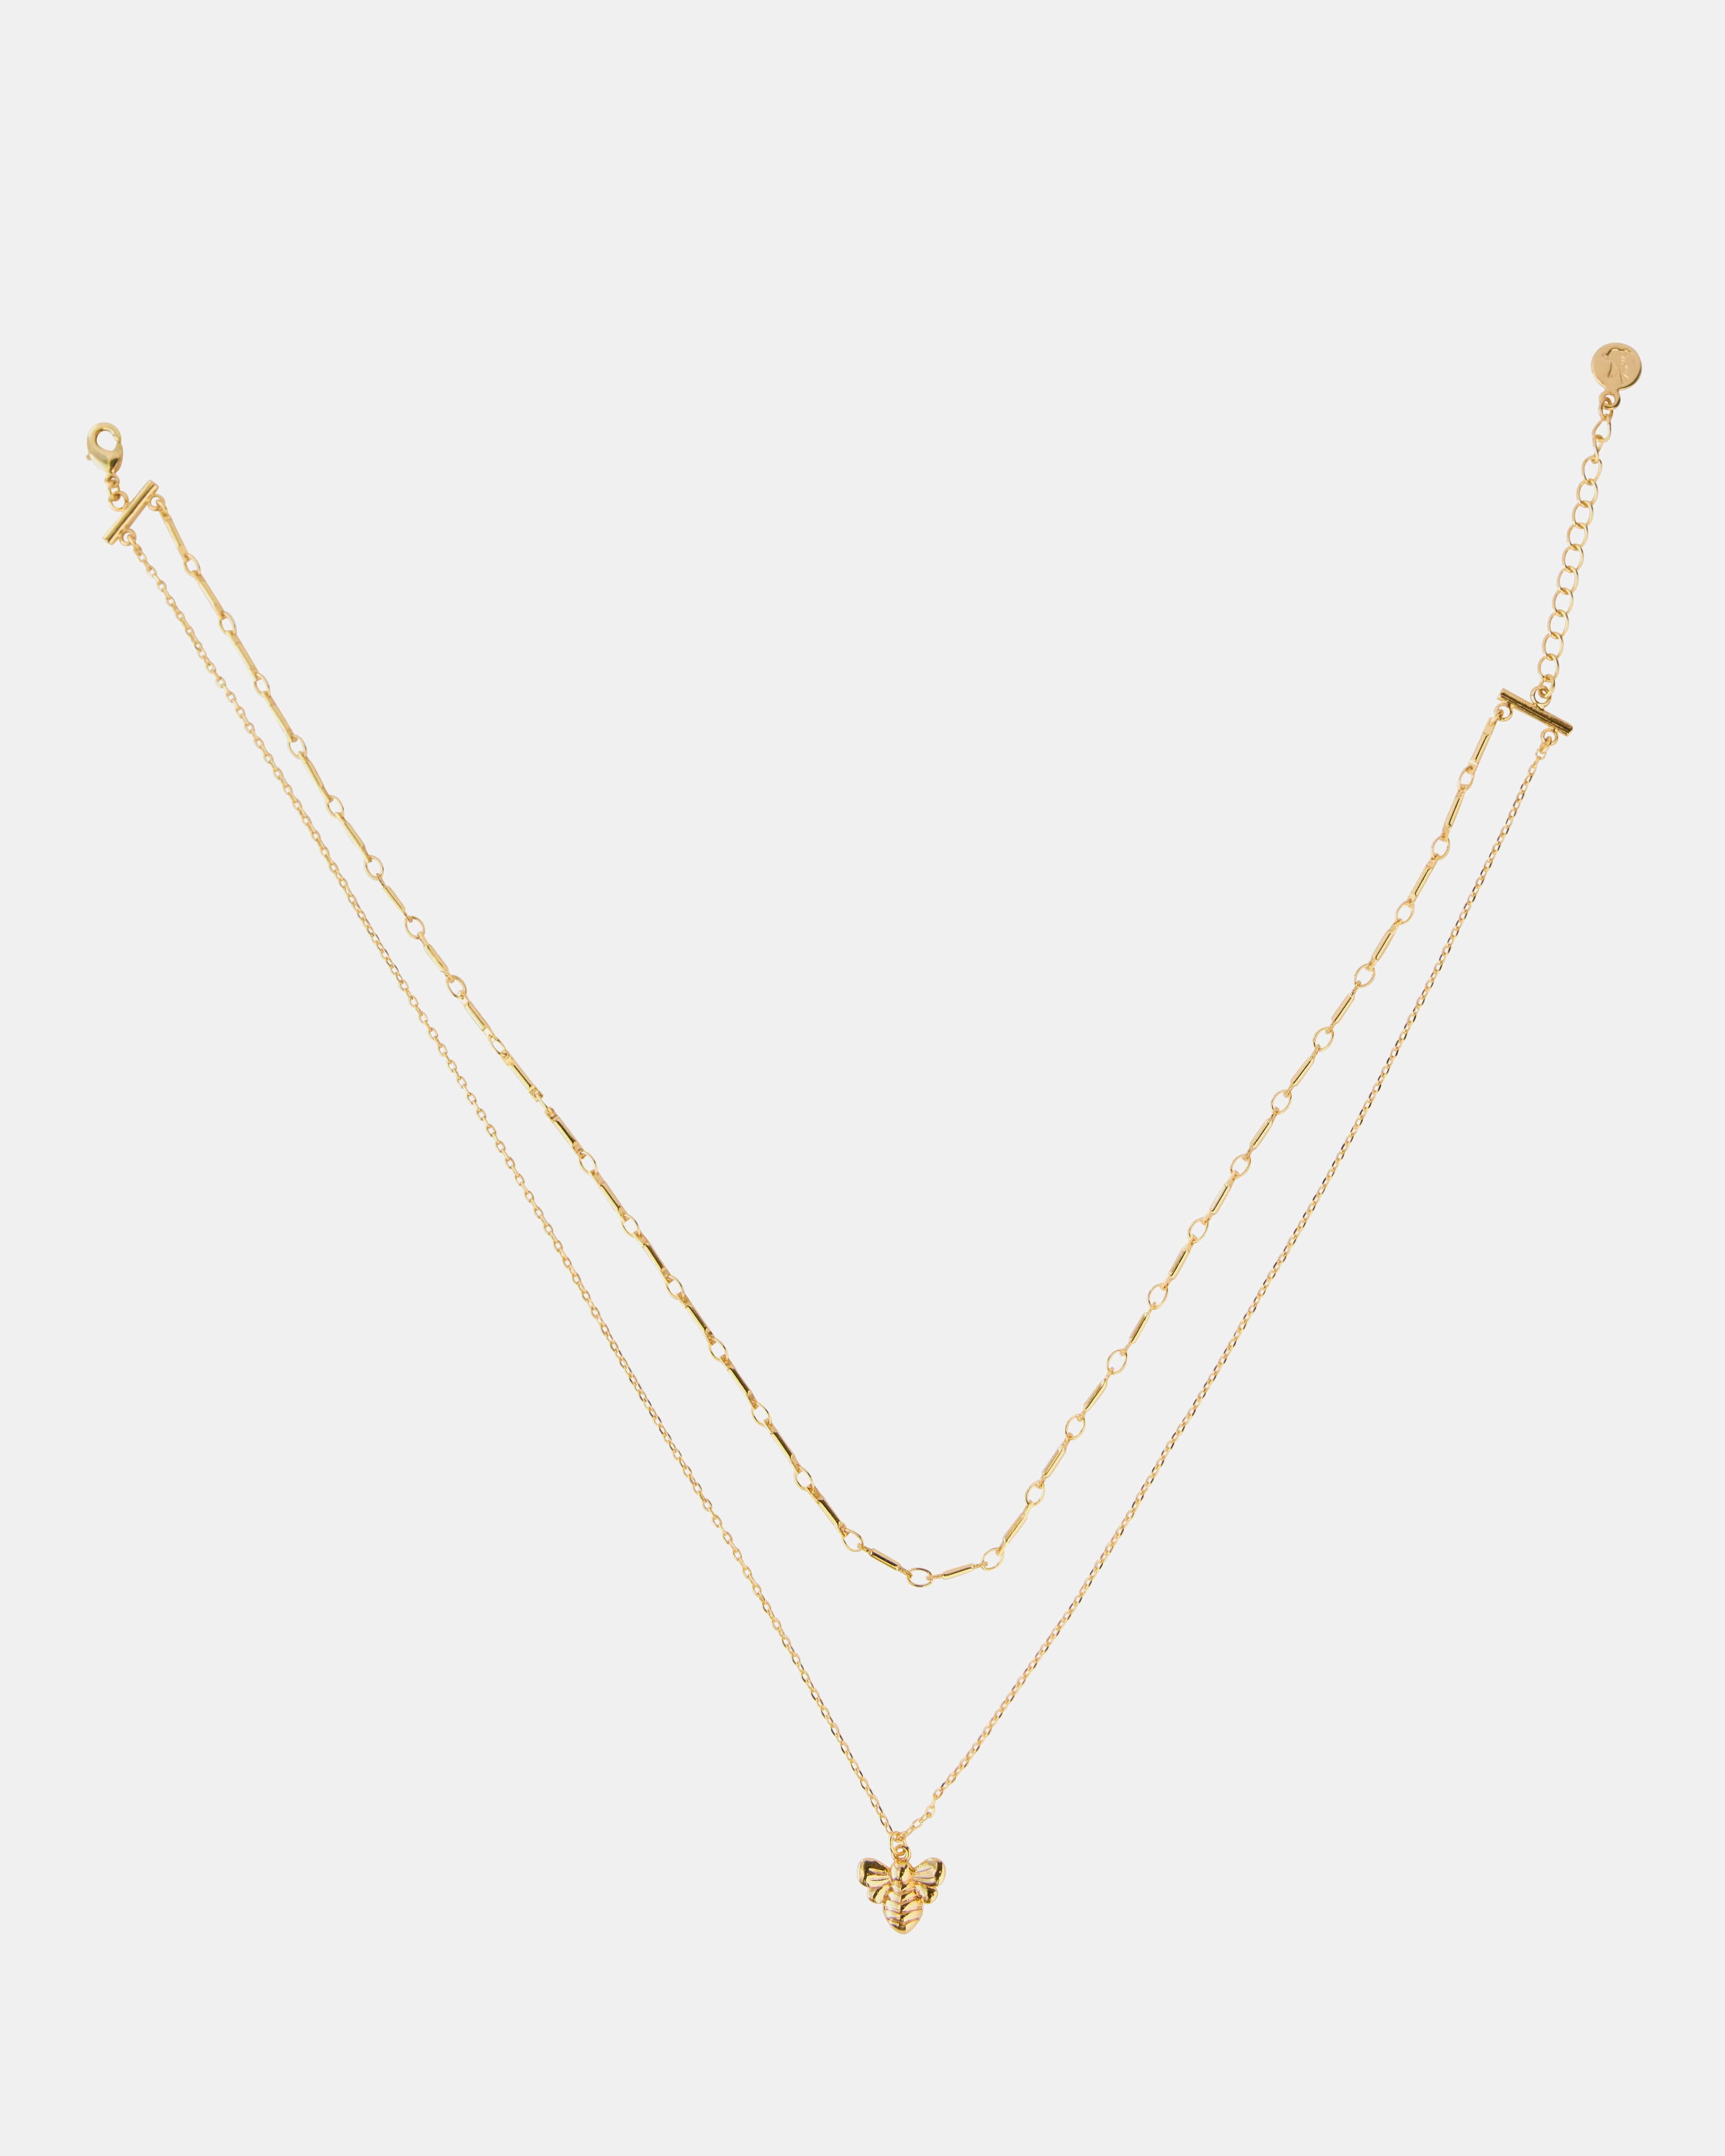 Gold two-chain necklace with bee charm.